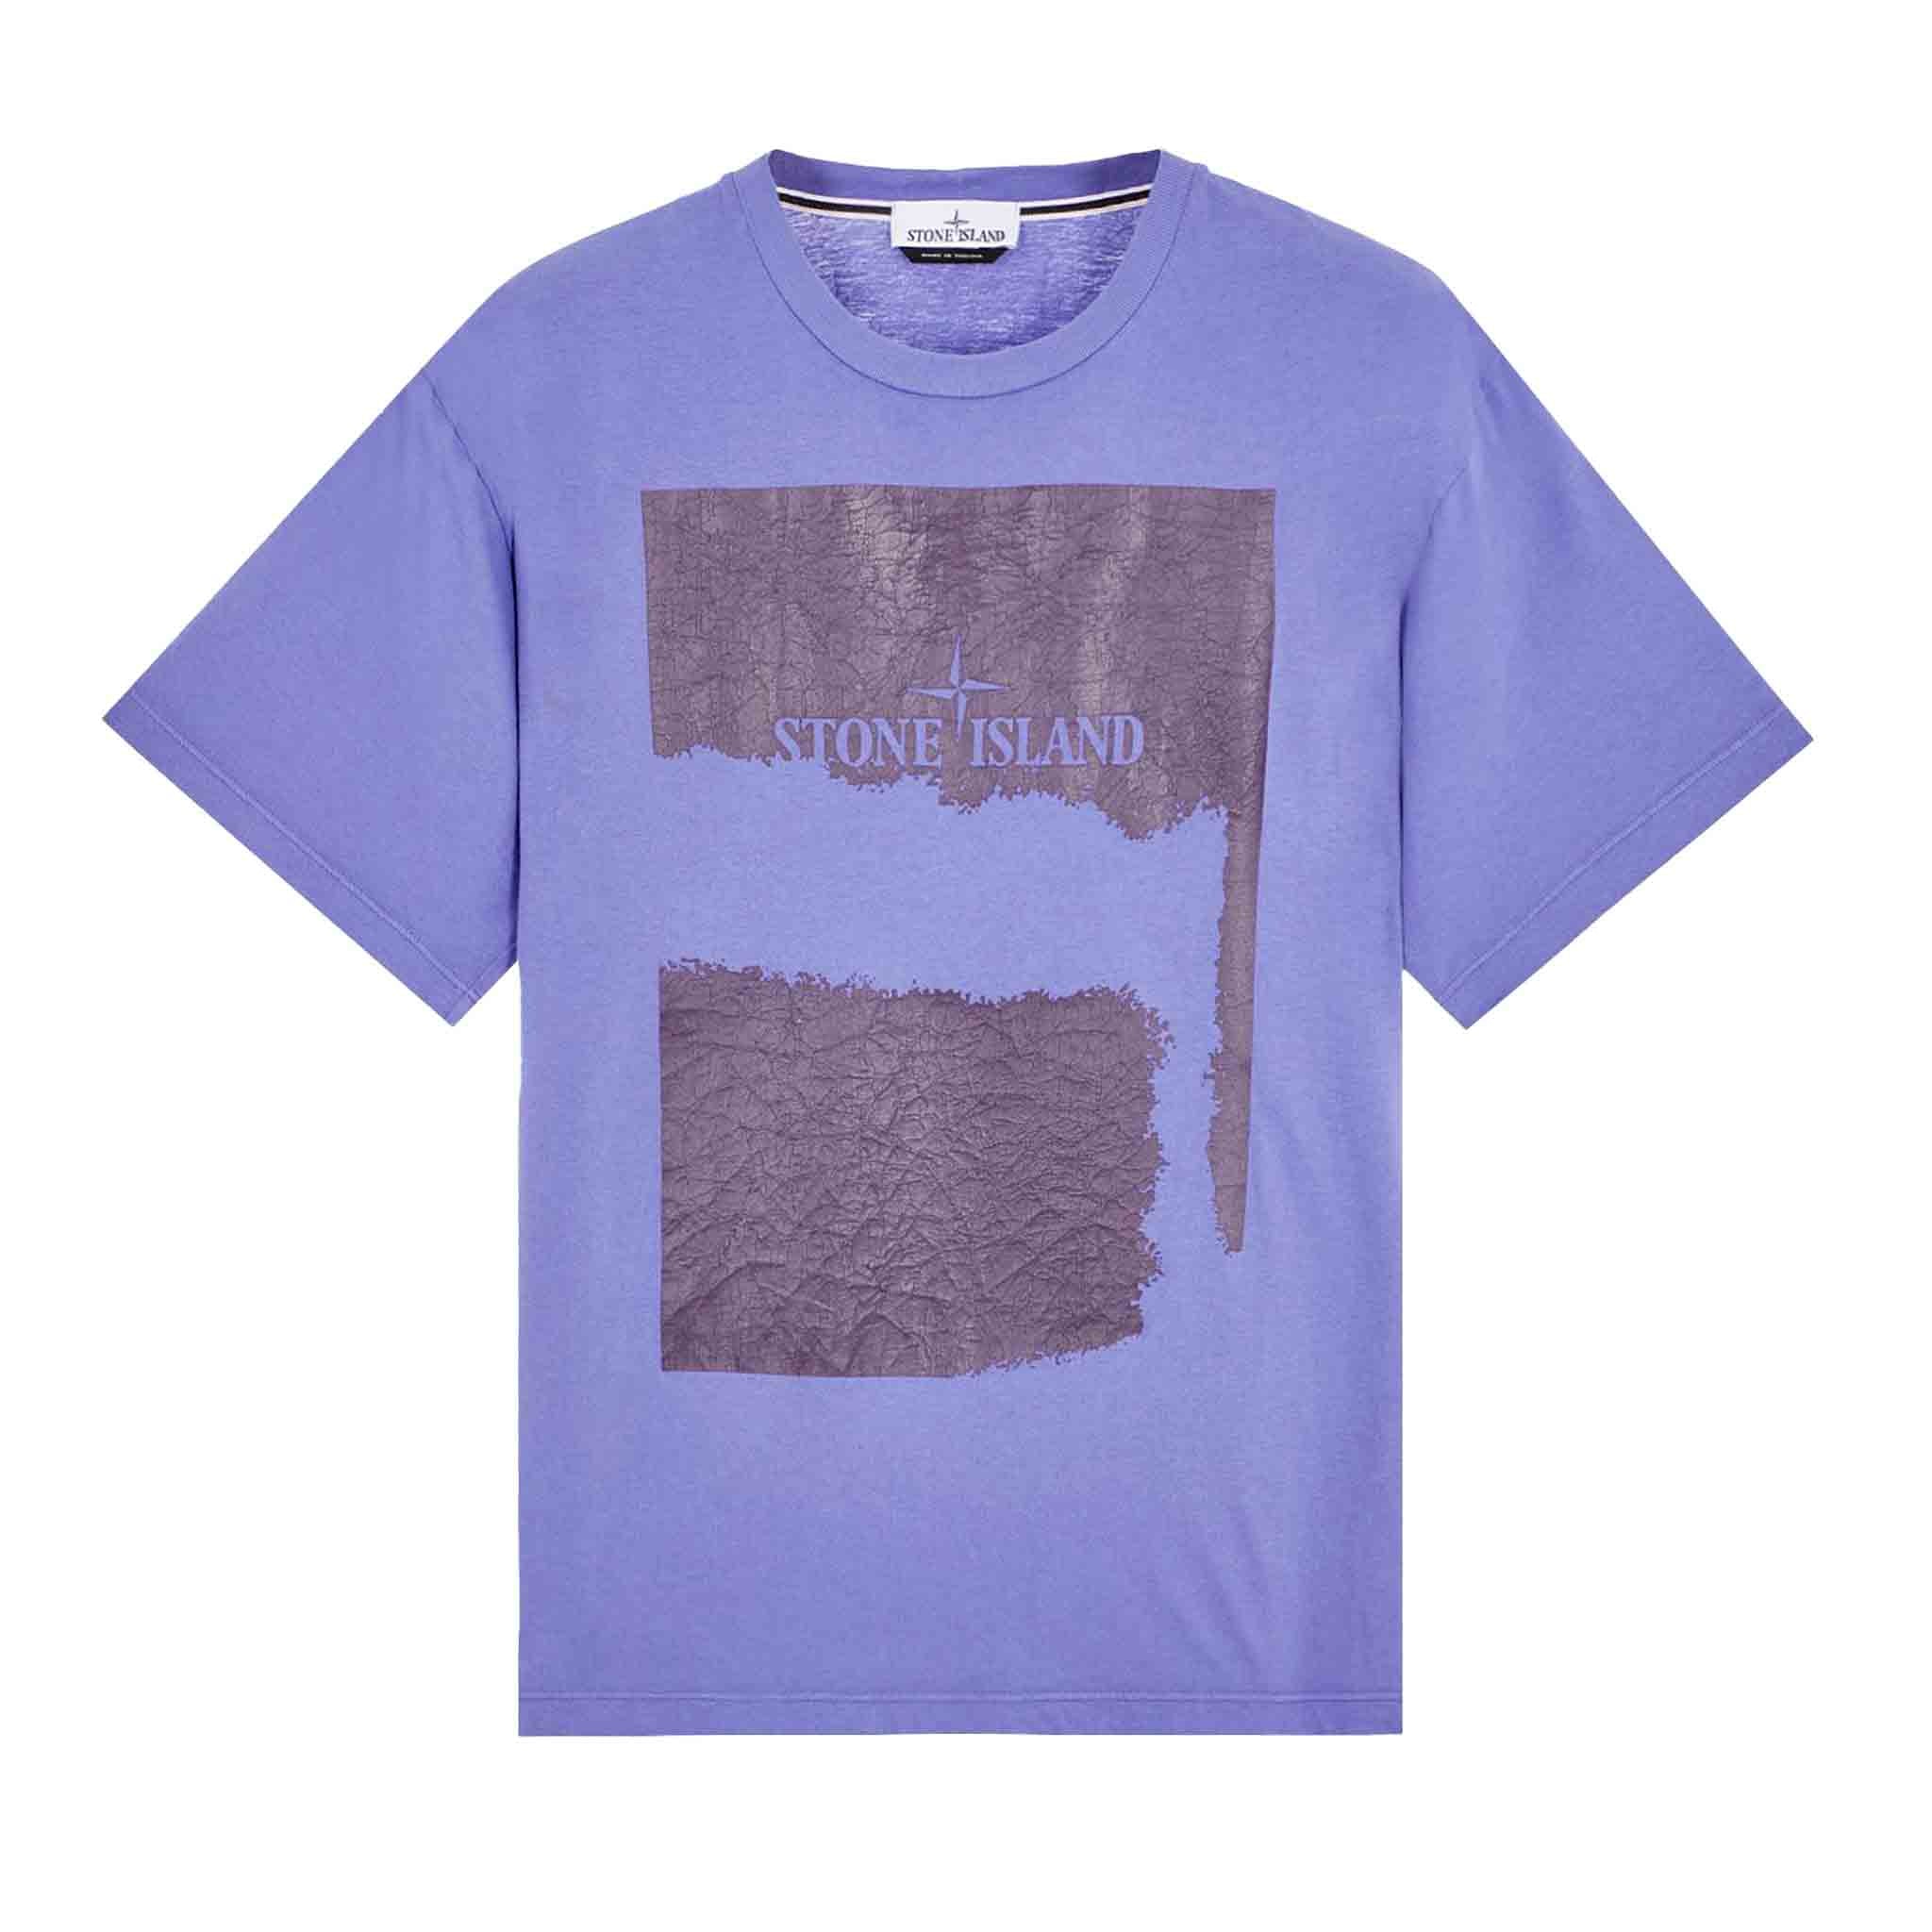 Stone Island "Scratched Paint Two" Print T-Shirt in Lavender